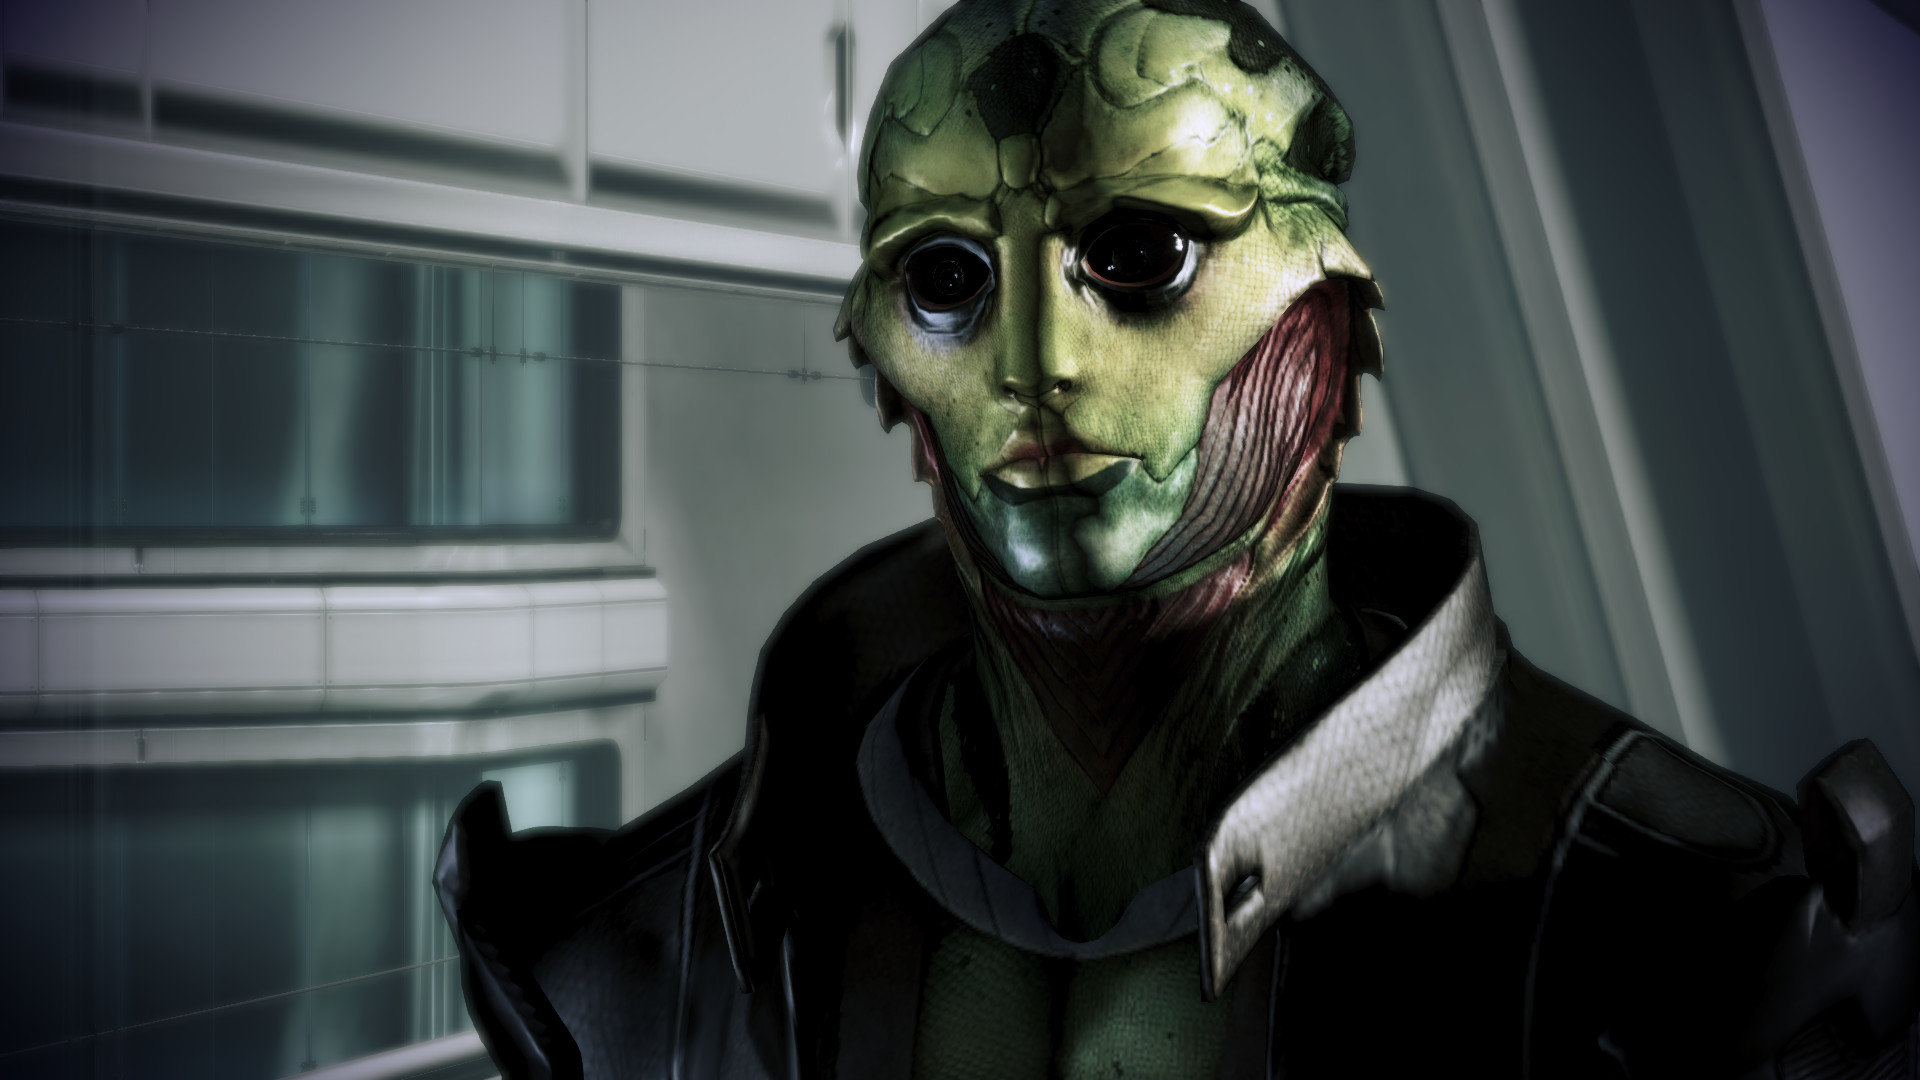 Free Thane Krios high quality wallpaper ID:457899 for 1080p computer